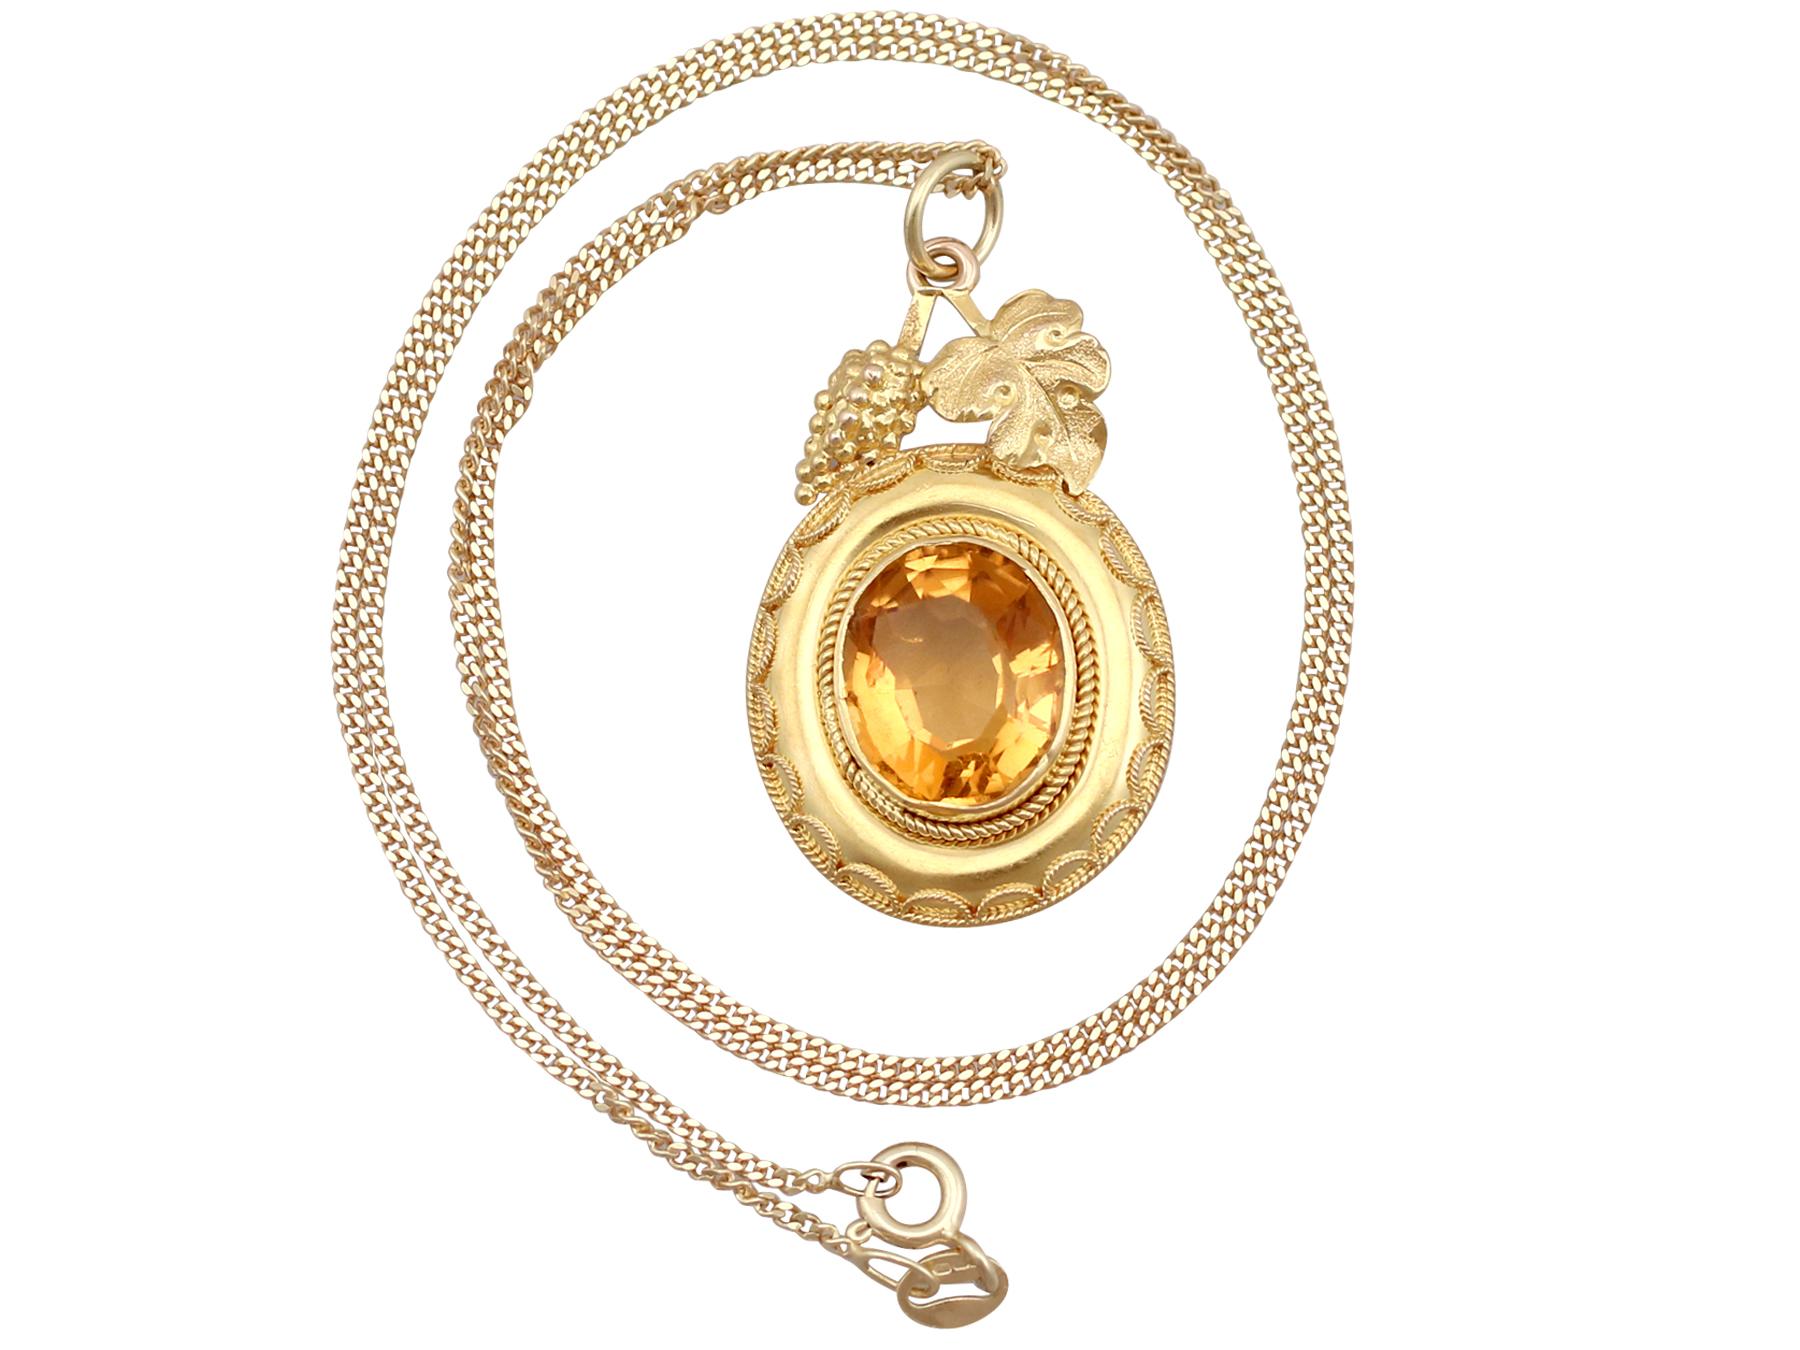 An impressive antique Victorian 5.25 carat citrine and 18k yellow gold pendant and chain; part of our diverse antique jewellery and estate jewelry collections.

This fine and impressive antique citrine pendant has been crafted in 18k yellow